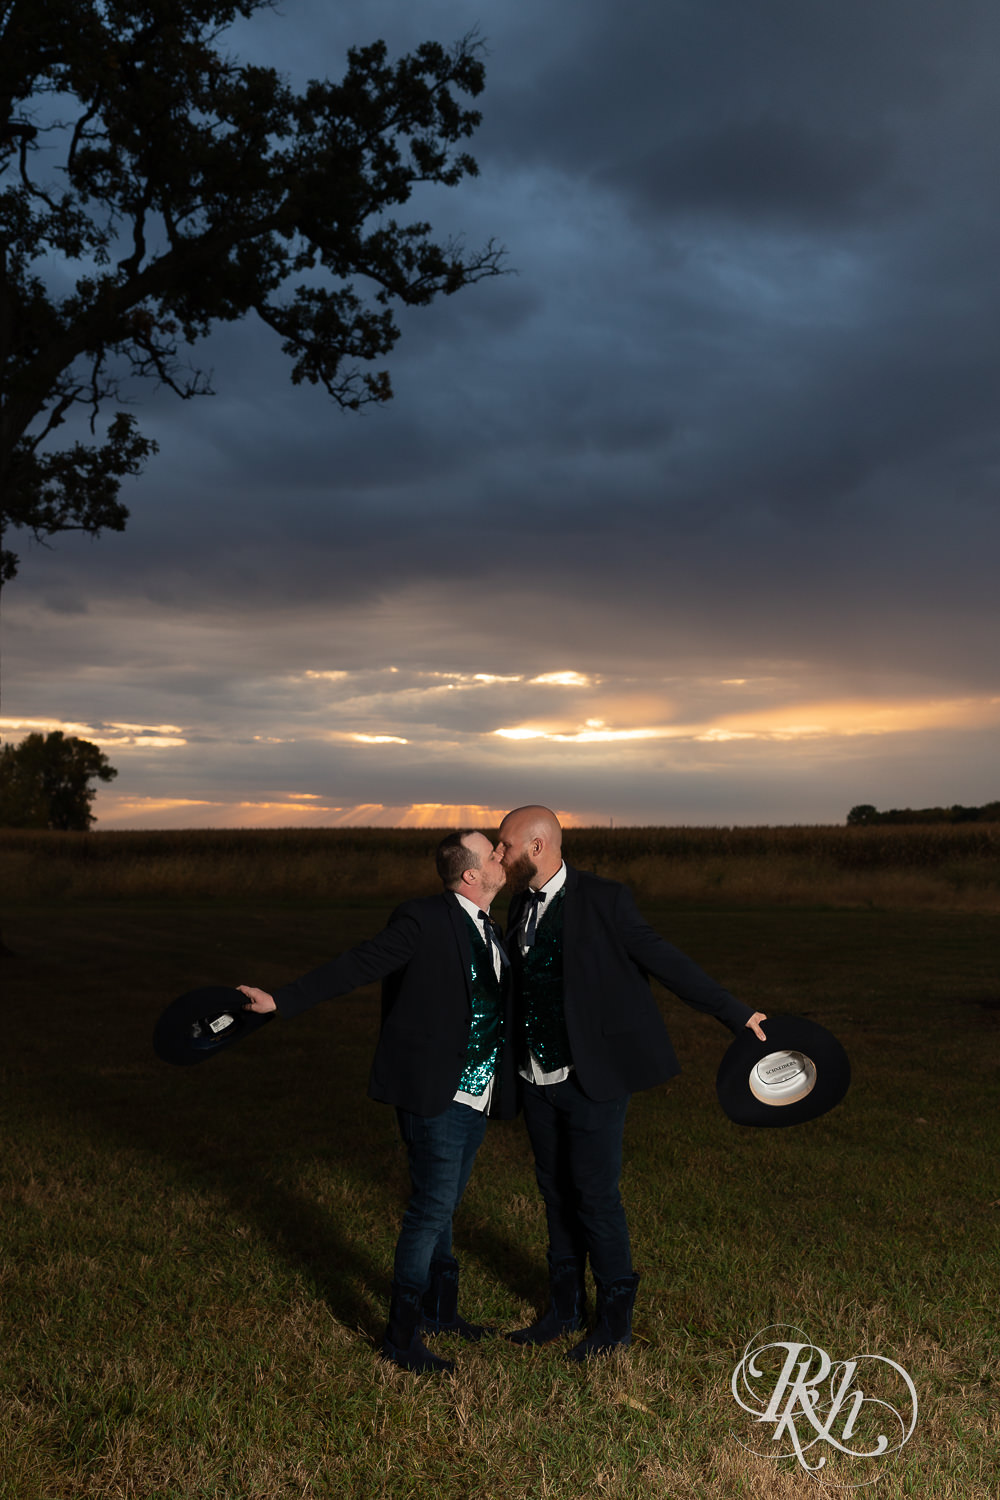 Grooms kissing each other during sunset on their wedding day.